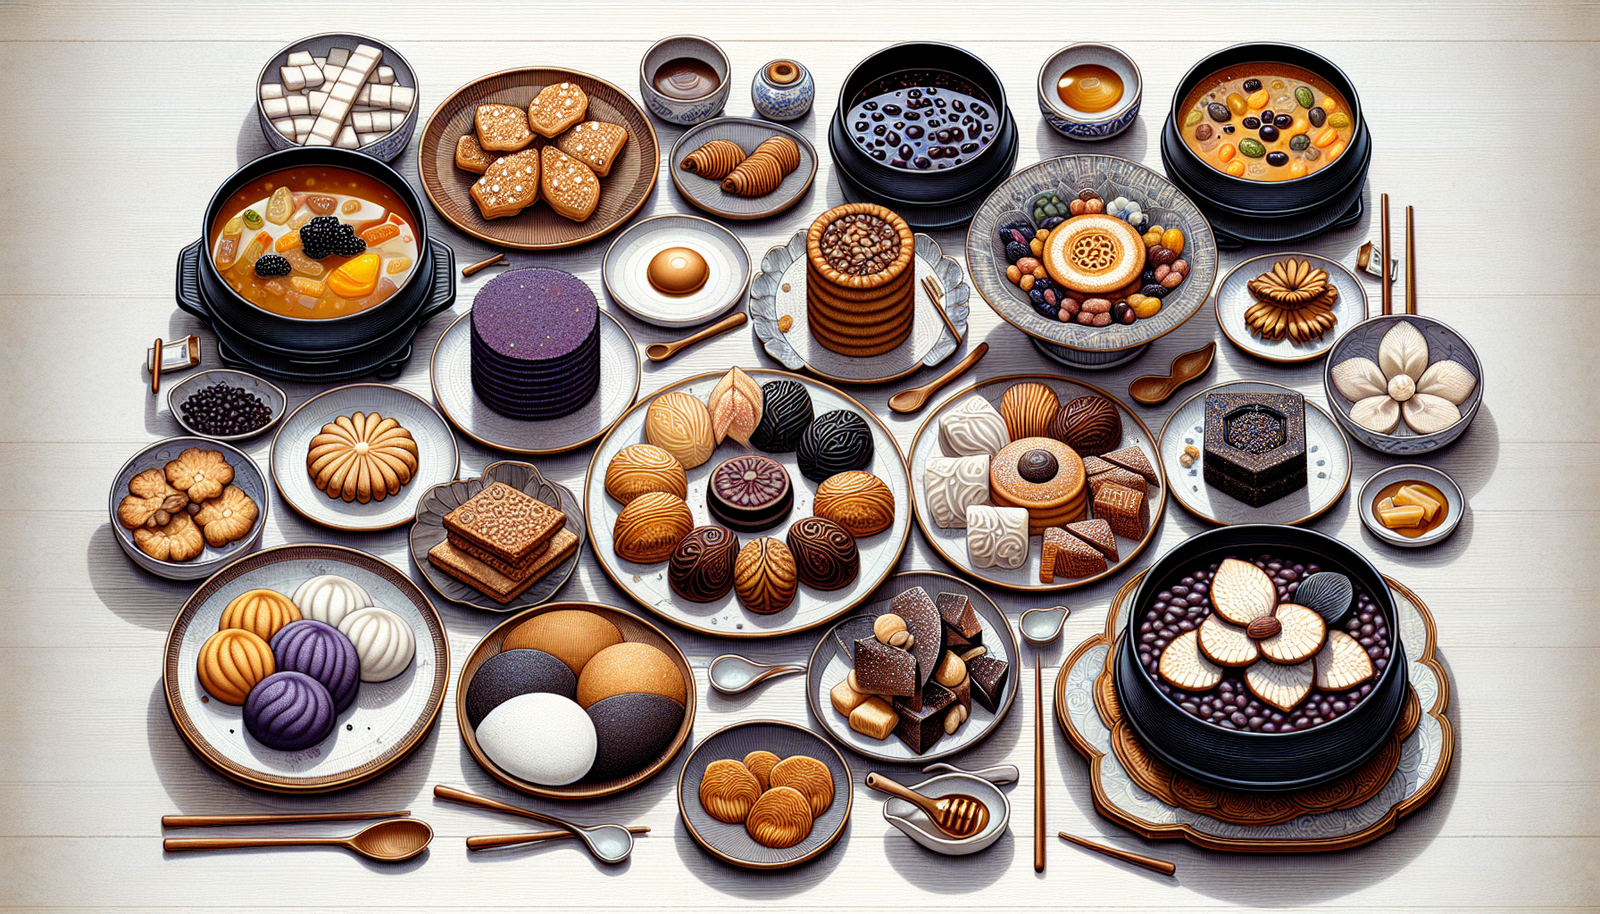 What Are Some Popular Korean Desserts And Sweets?